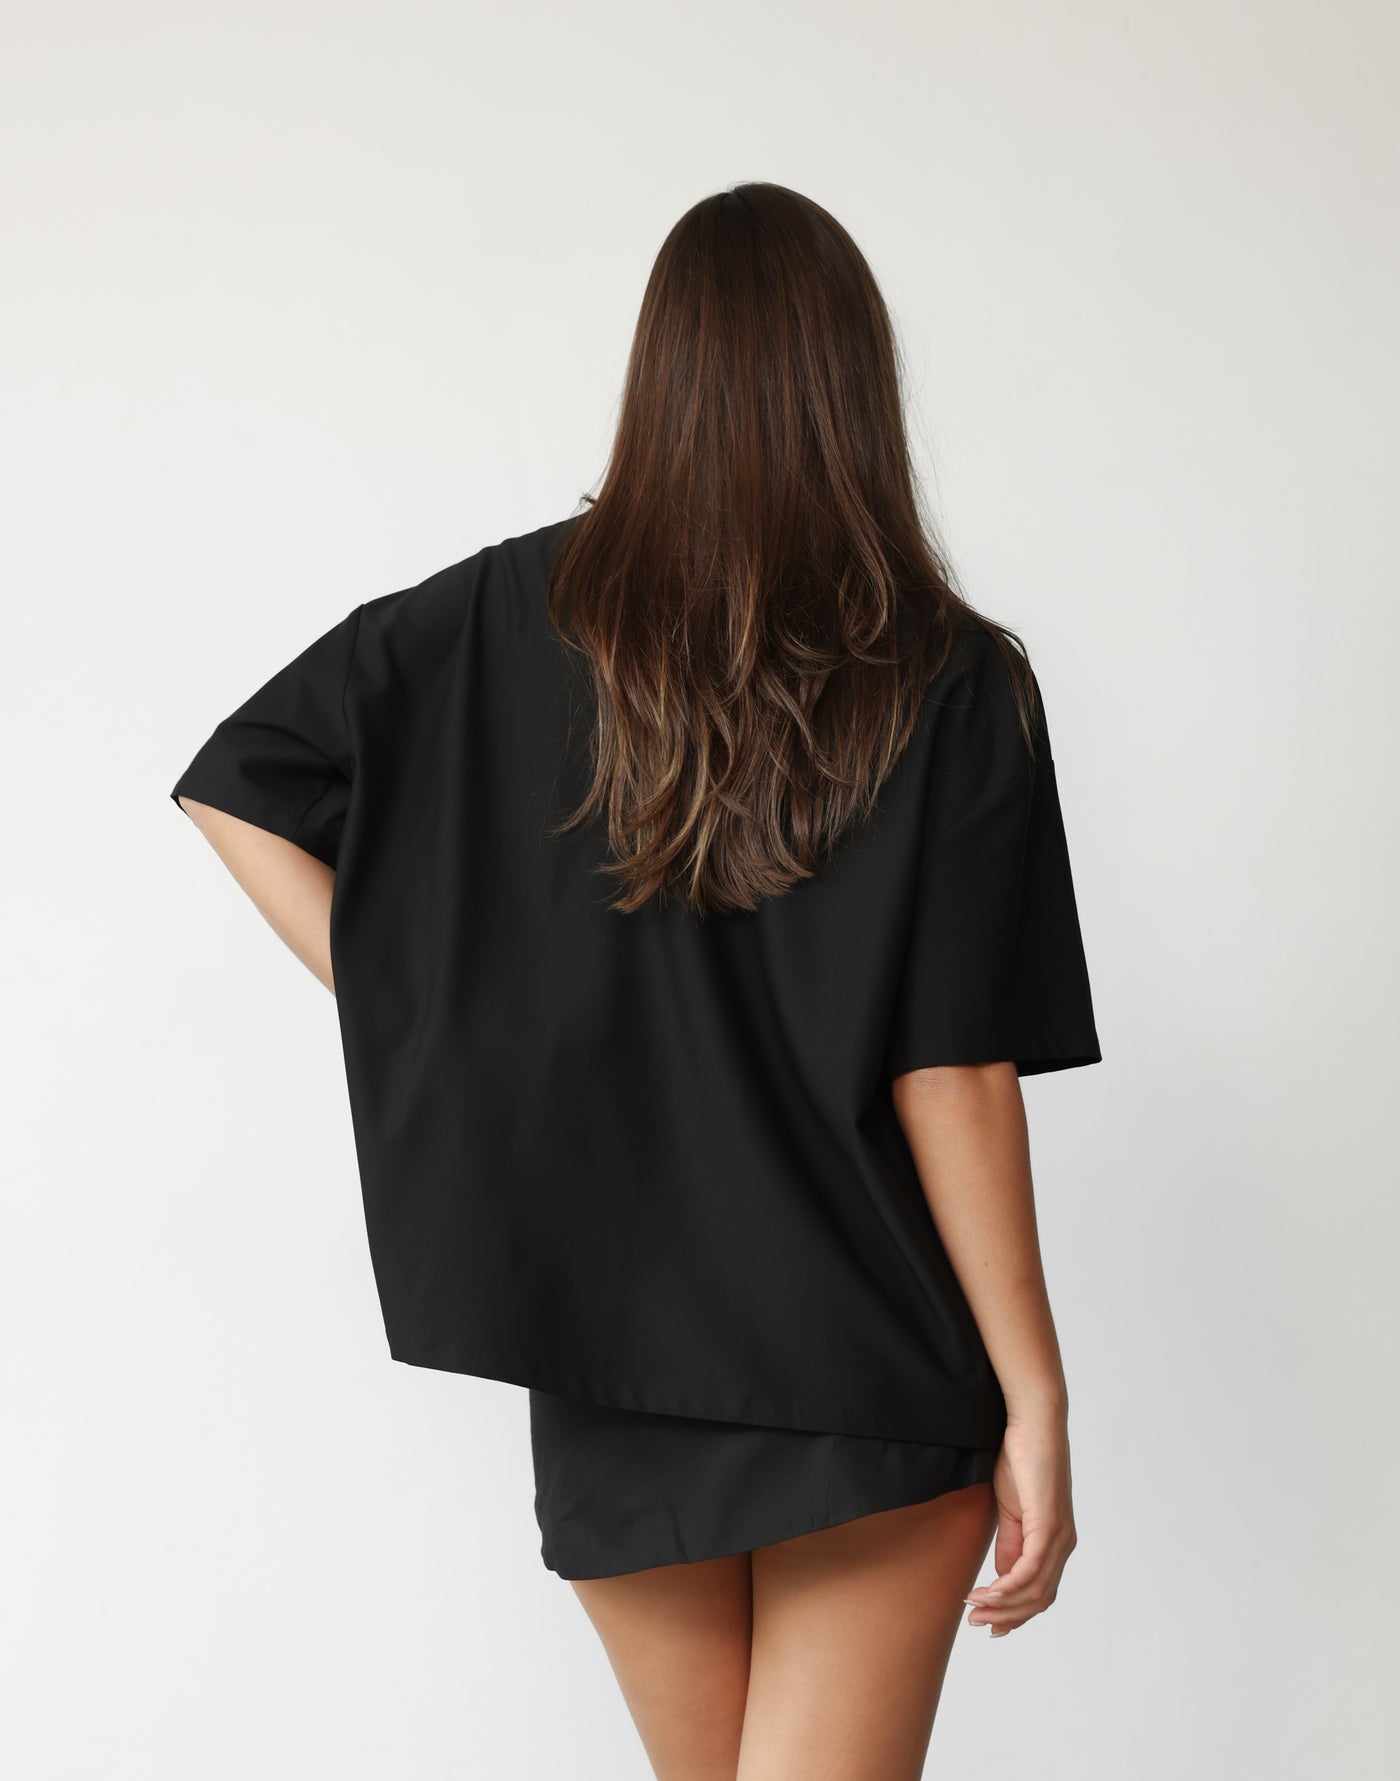 Ashwood Shirt (Black) | Charcoal Clothing Exclusive - Button Down Collared Neckline Shirt - Women's Top - Charcoal Clothing